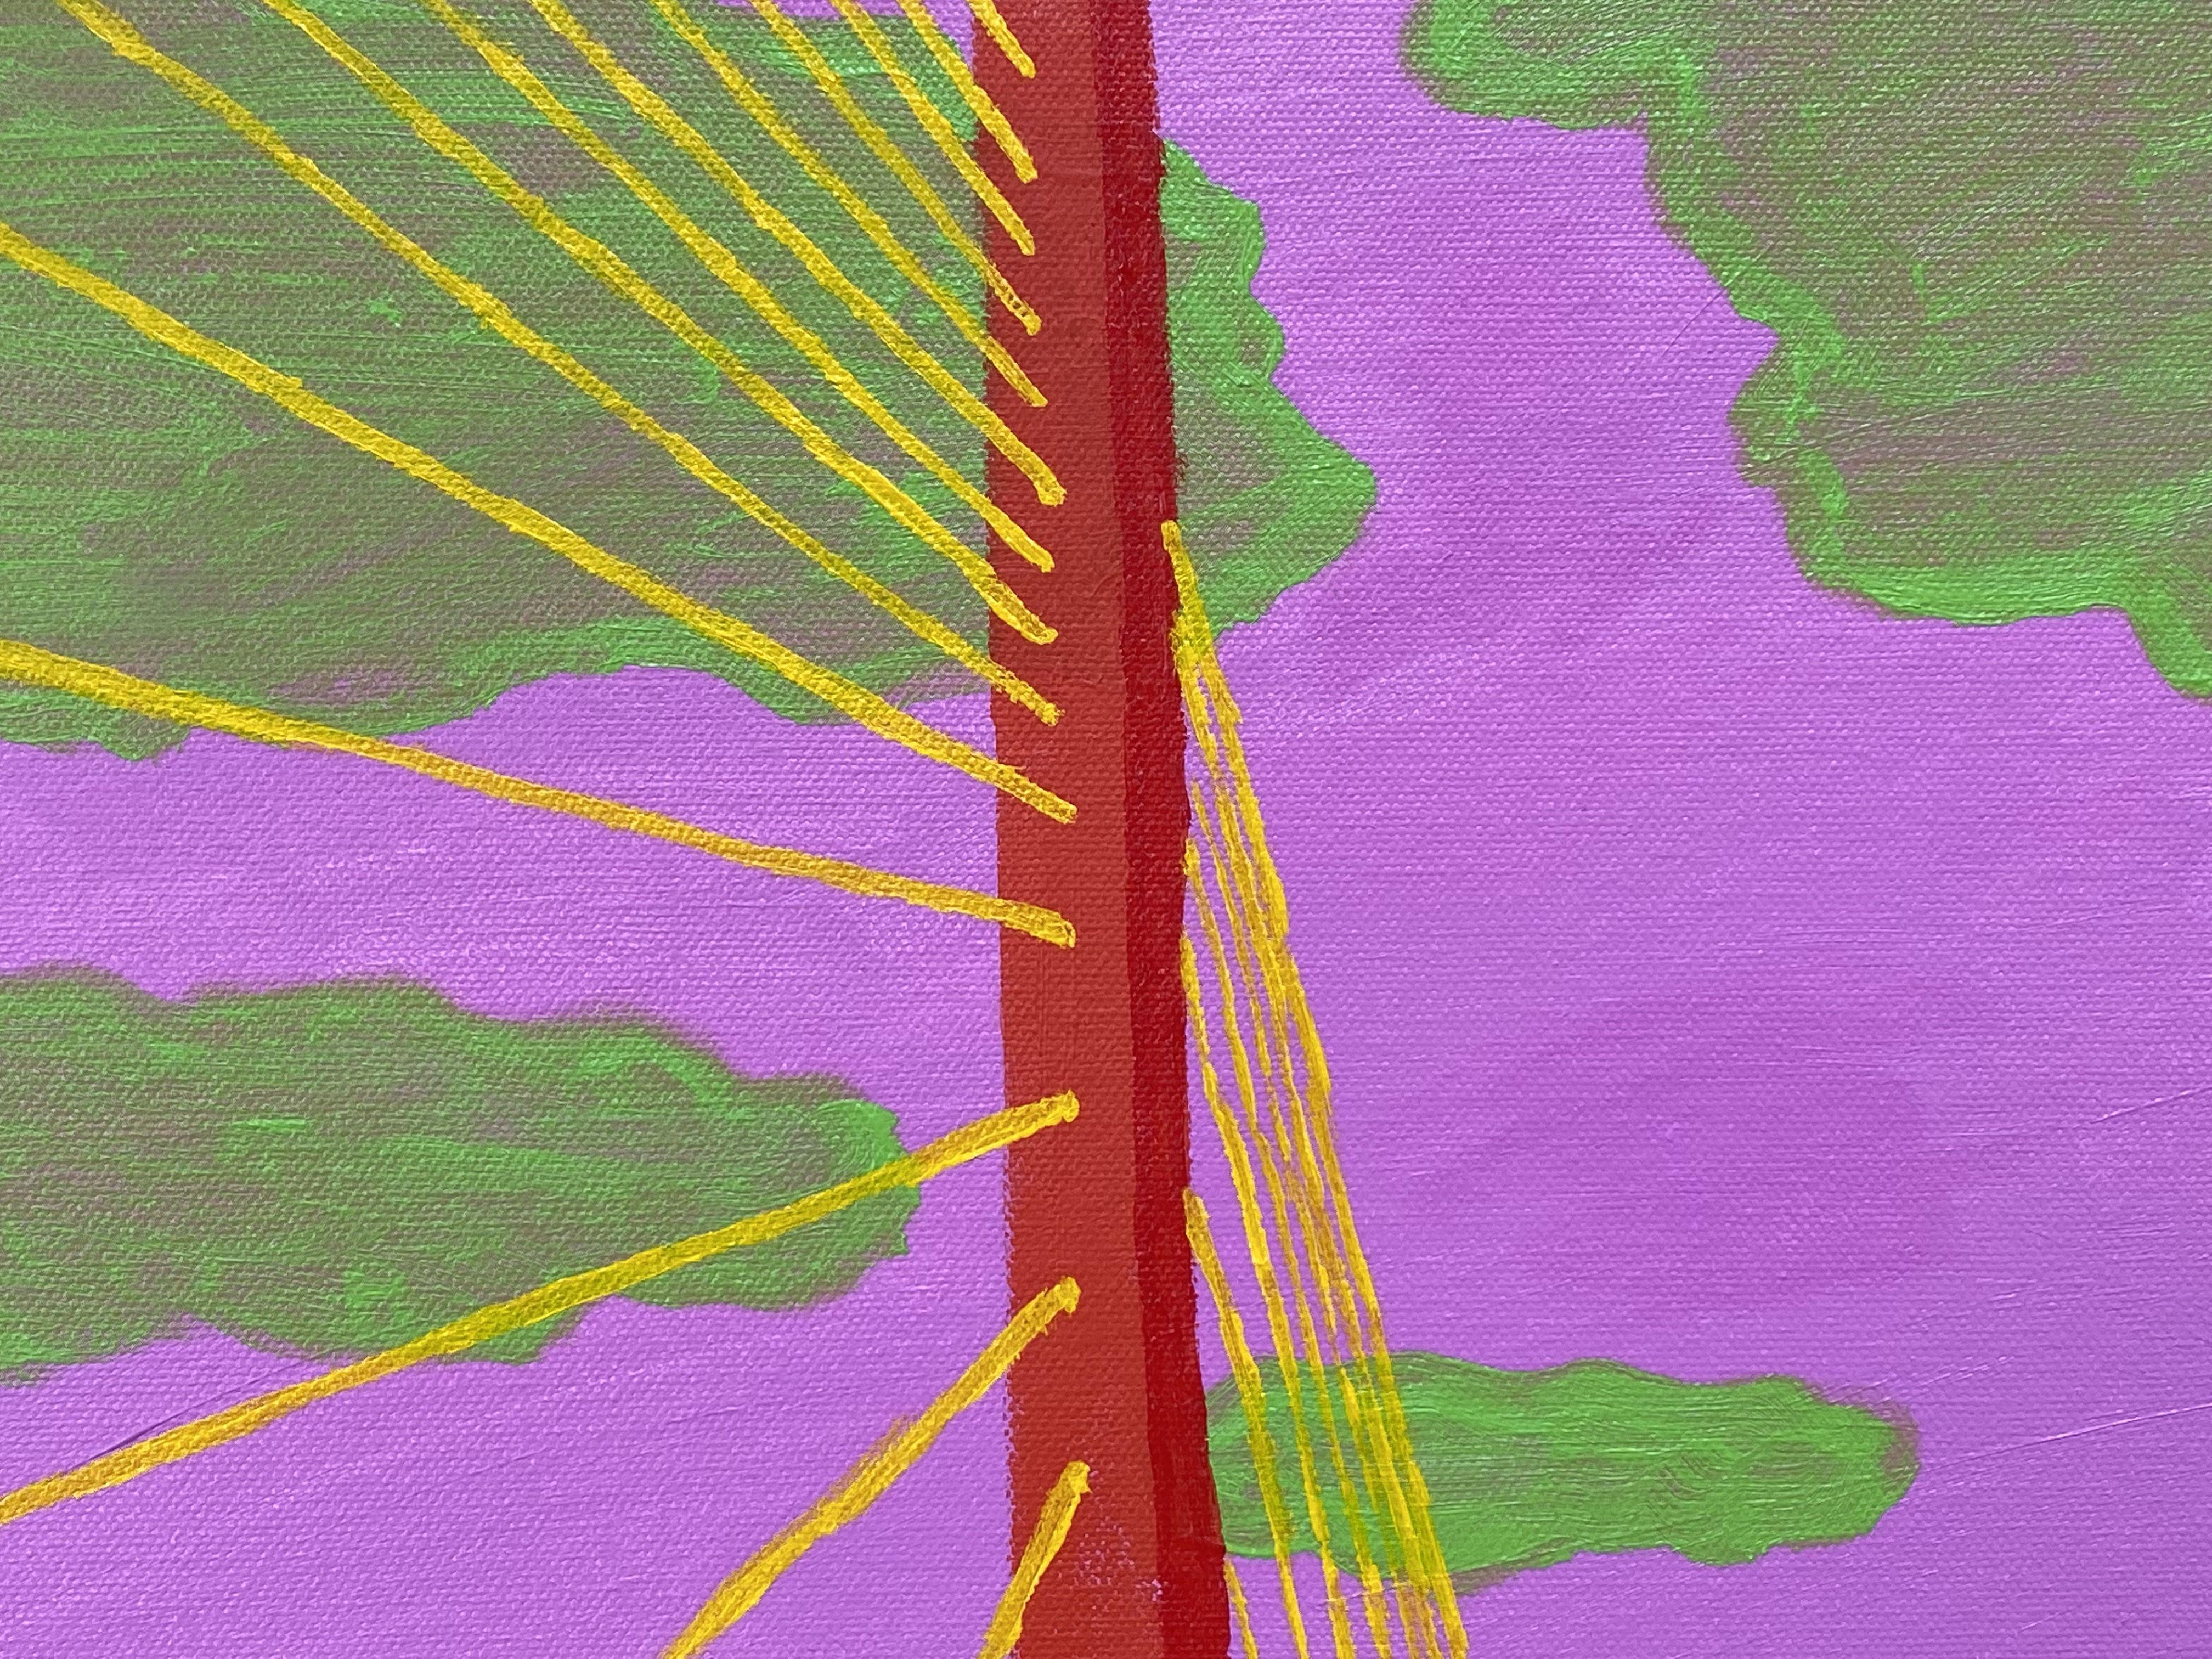 This vibrant Pop Art landscape painting was inspired by the Sunshine Skyway Bridge which spans the Lower Tampa Bay connecting St. Petersburg, Florida to Terra Ceia. I created this unusual work with brilliant pink, green, red and blue, disregarding